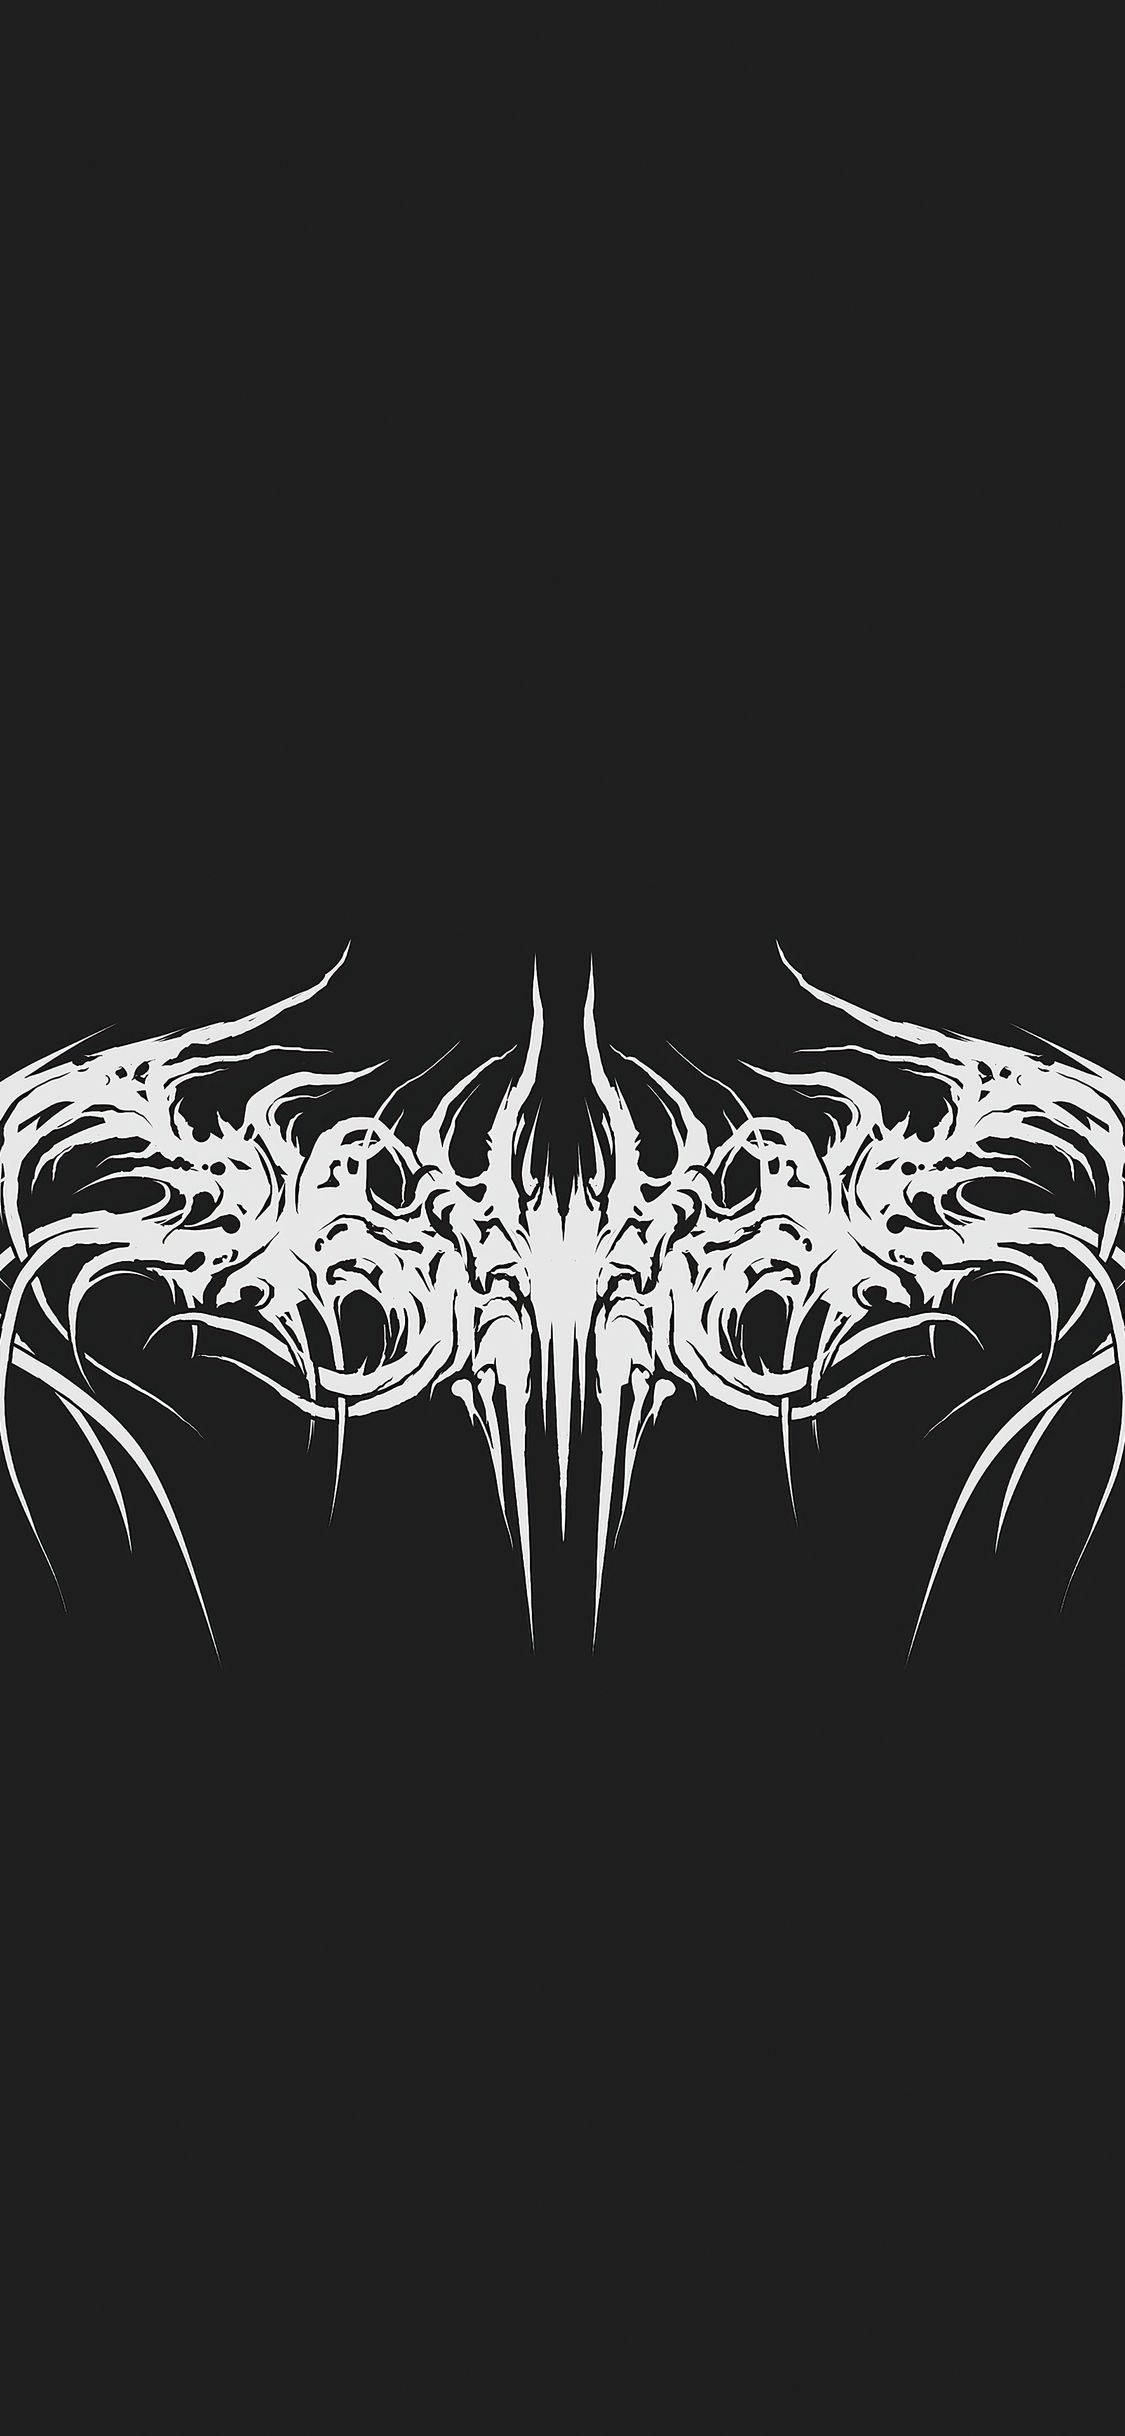 Metal Band Logo 4k iPhone XS, iPhone iPhone X HD 4k Wallpaper, Image, Background, Photo and Picture